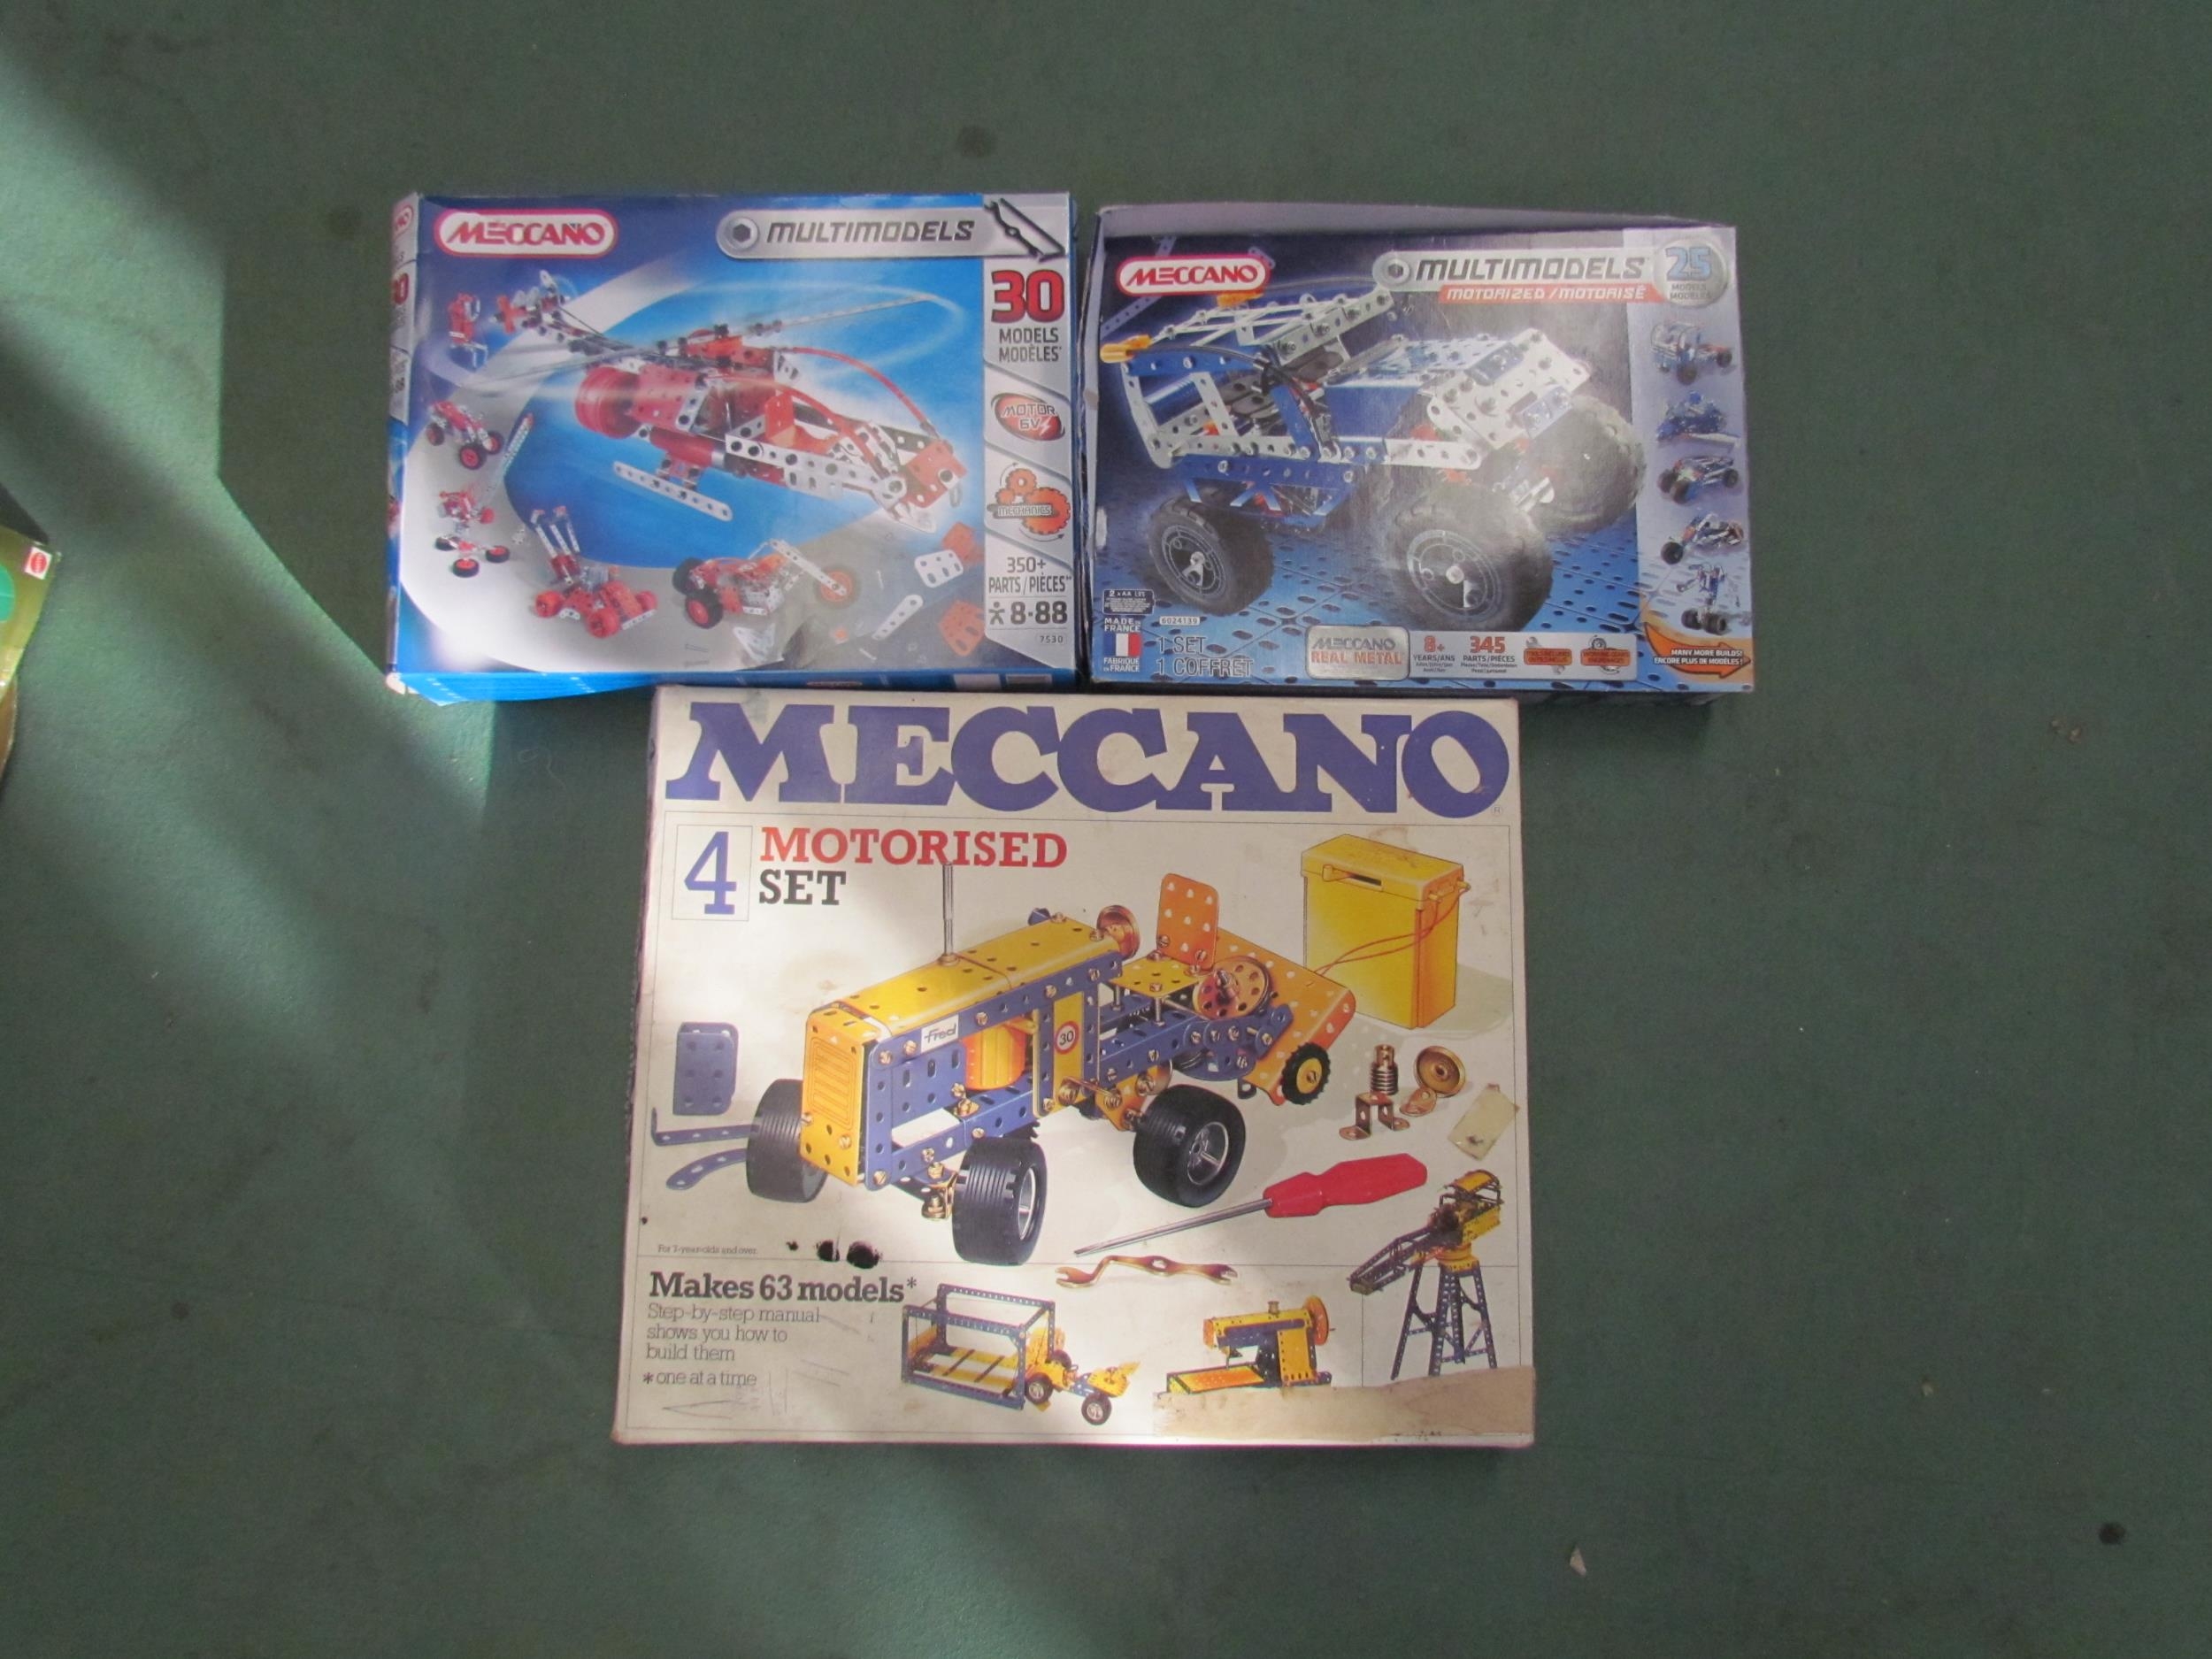 A Meccano Motorized Set 4 together with two Meccano Multimodel sets (3)